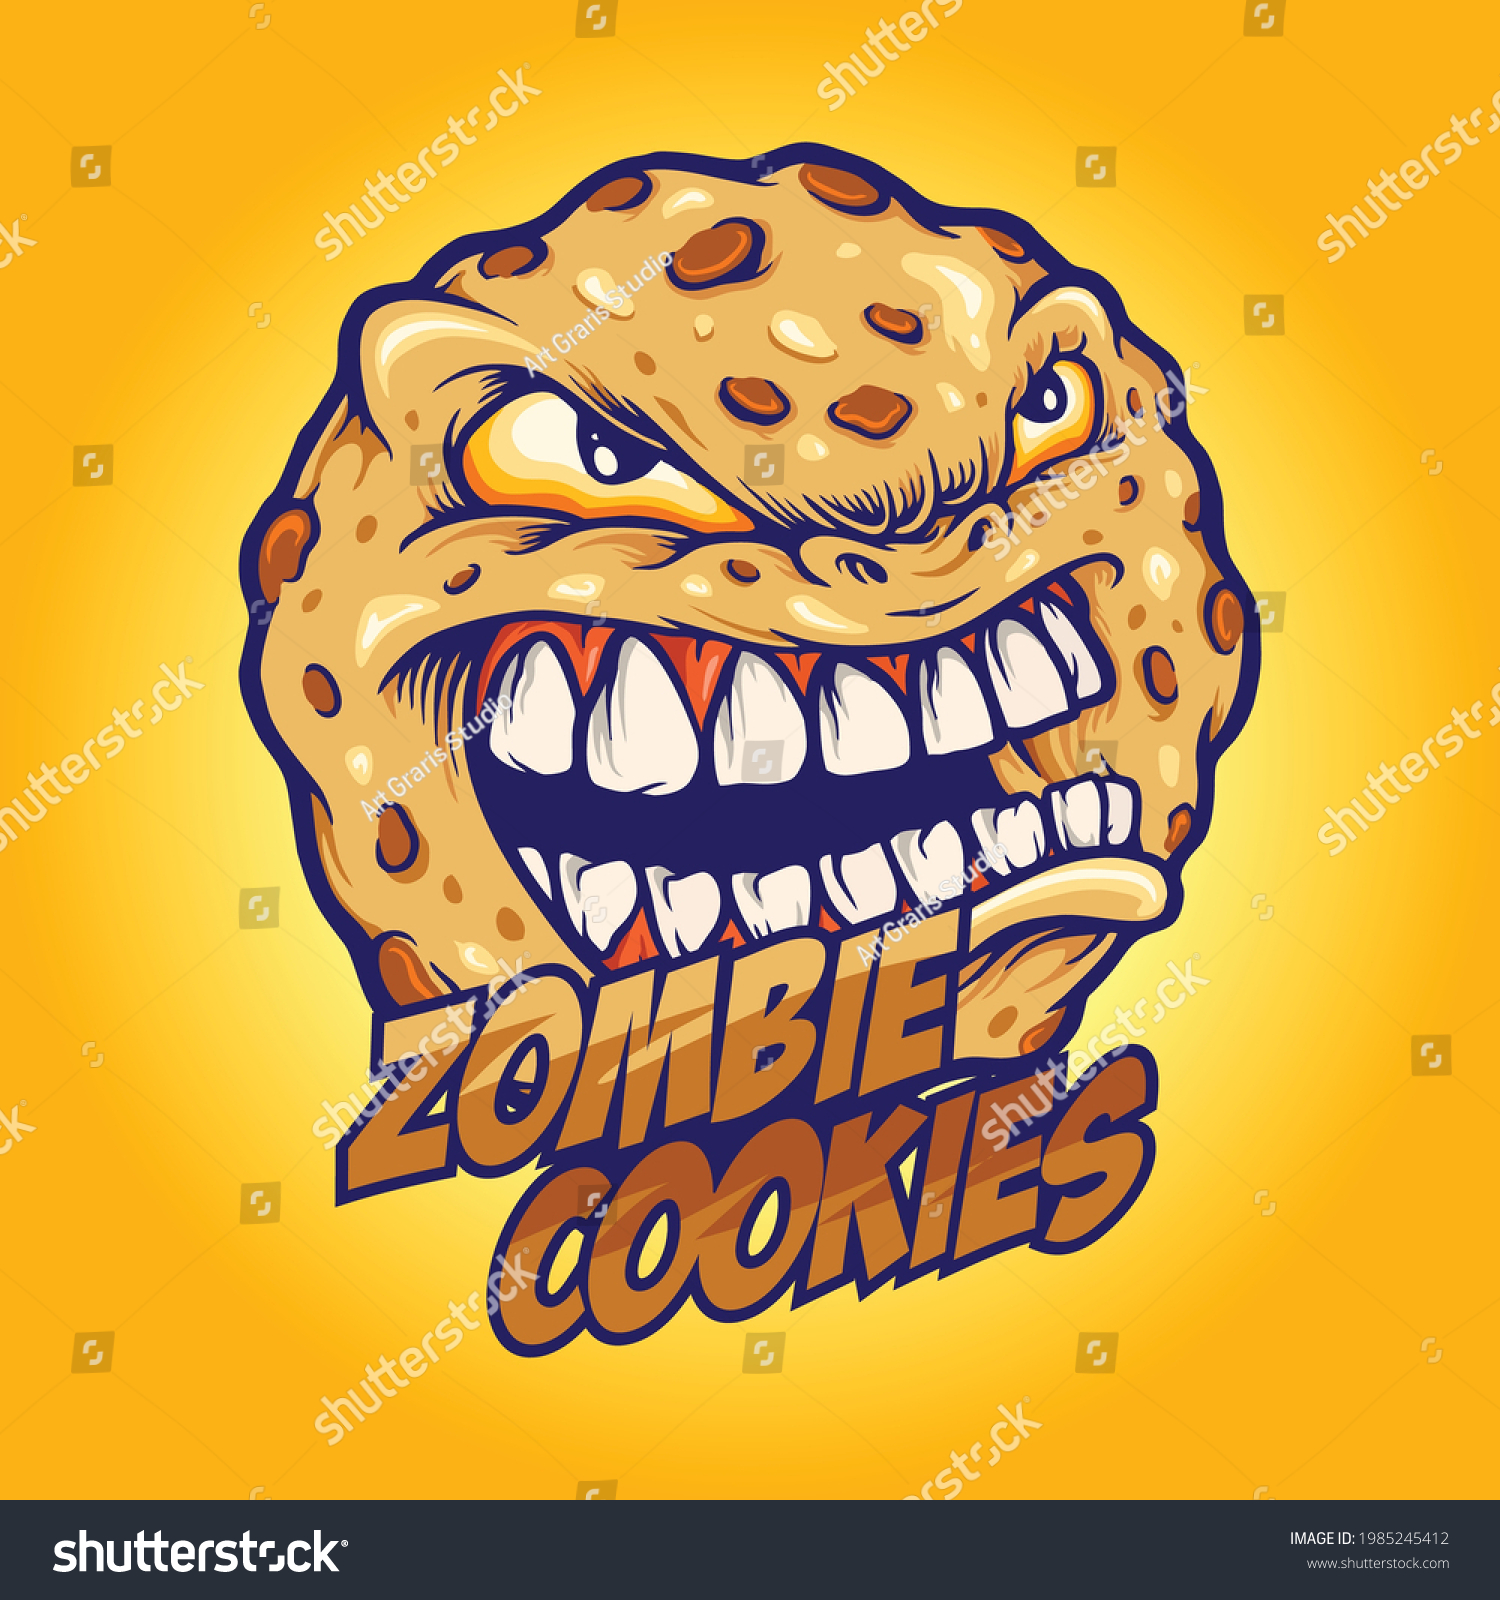 SVG of cookies angry zombie mascot Vector illustrations for your work Logo, mascot merchandise t-shirt, stickers and Label designs, poster, greeting cards advertising business company or brands. svg